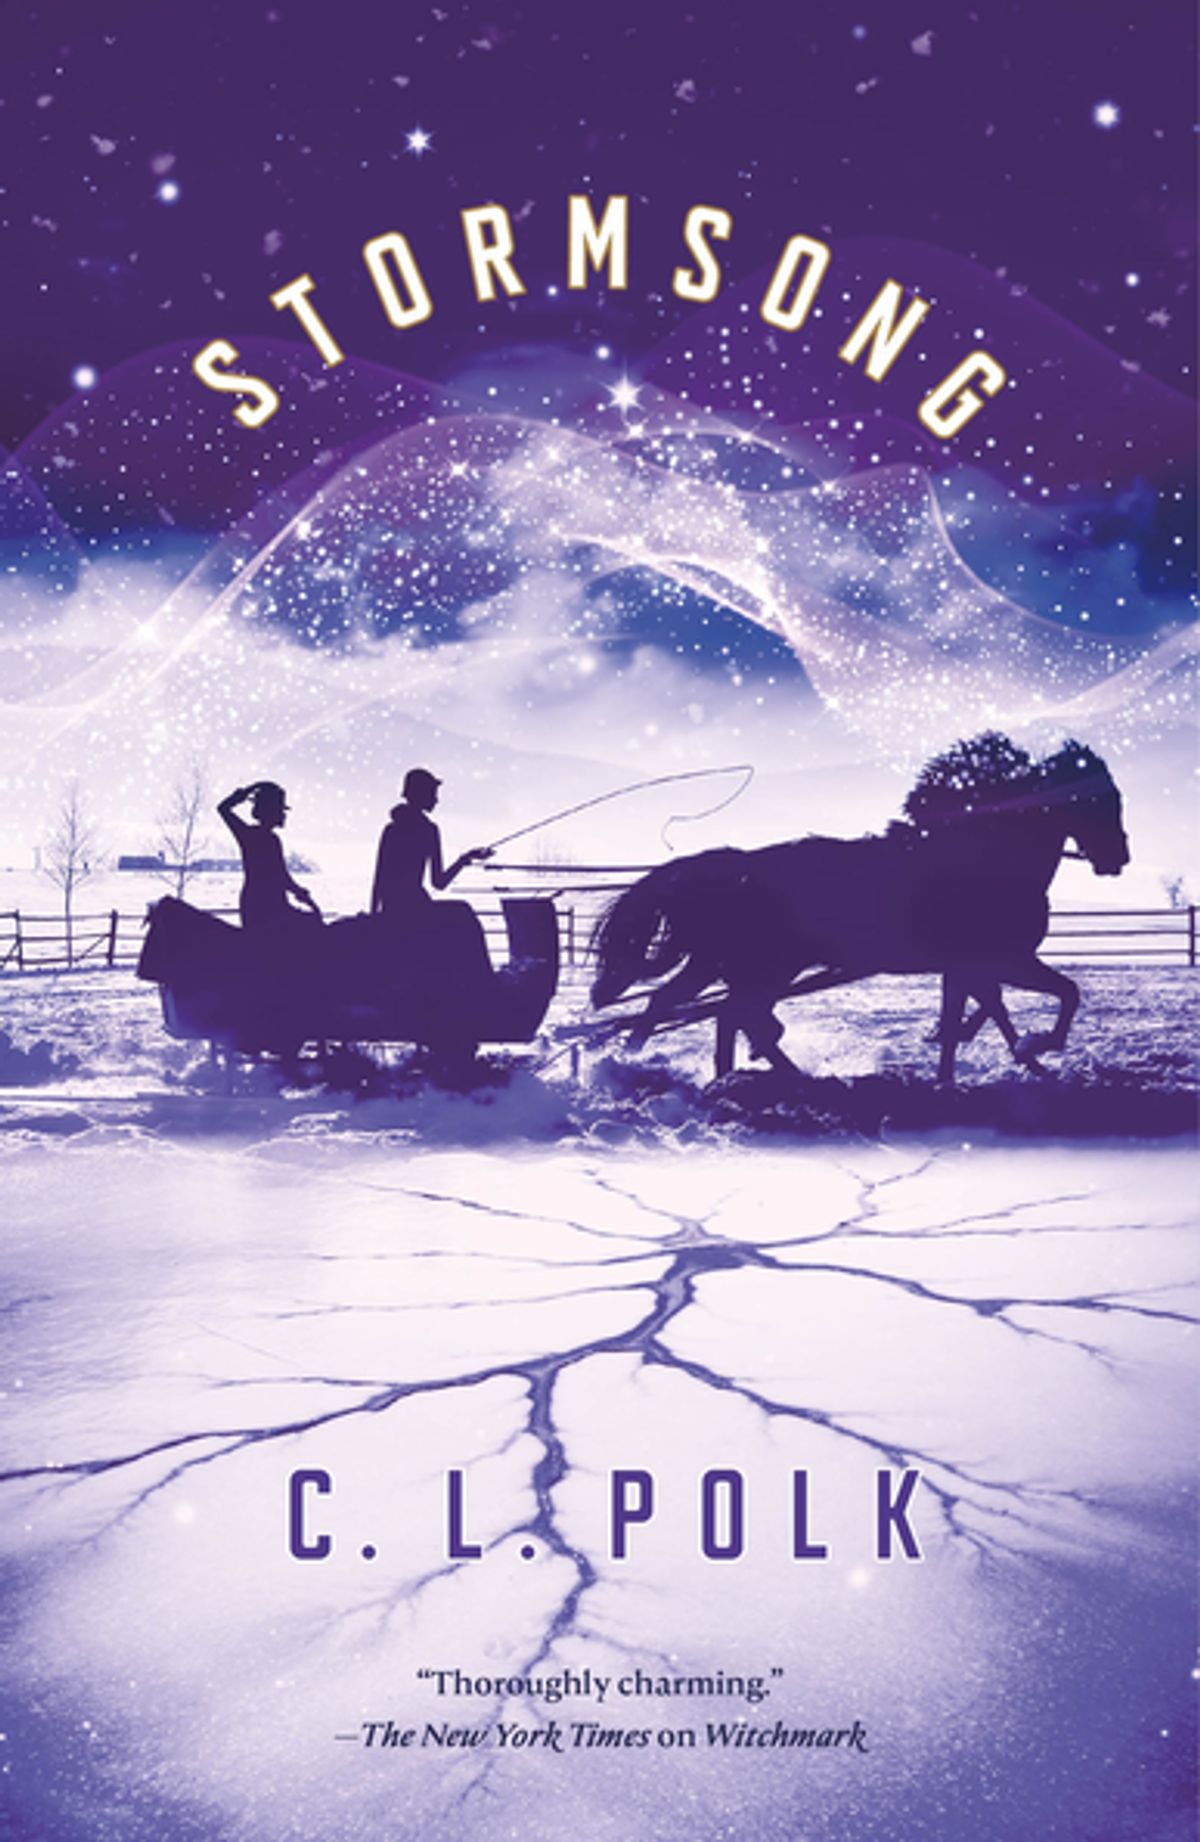 stormstrong cover has a horse and sleigh riding across ice